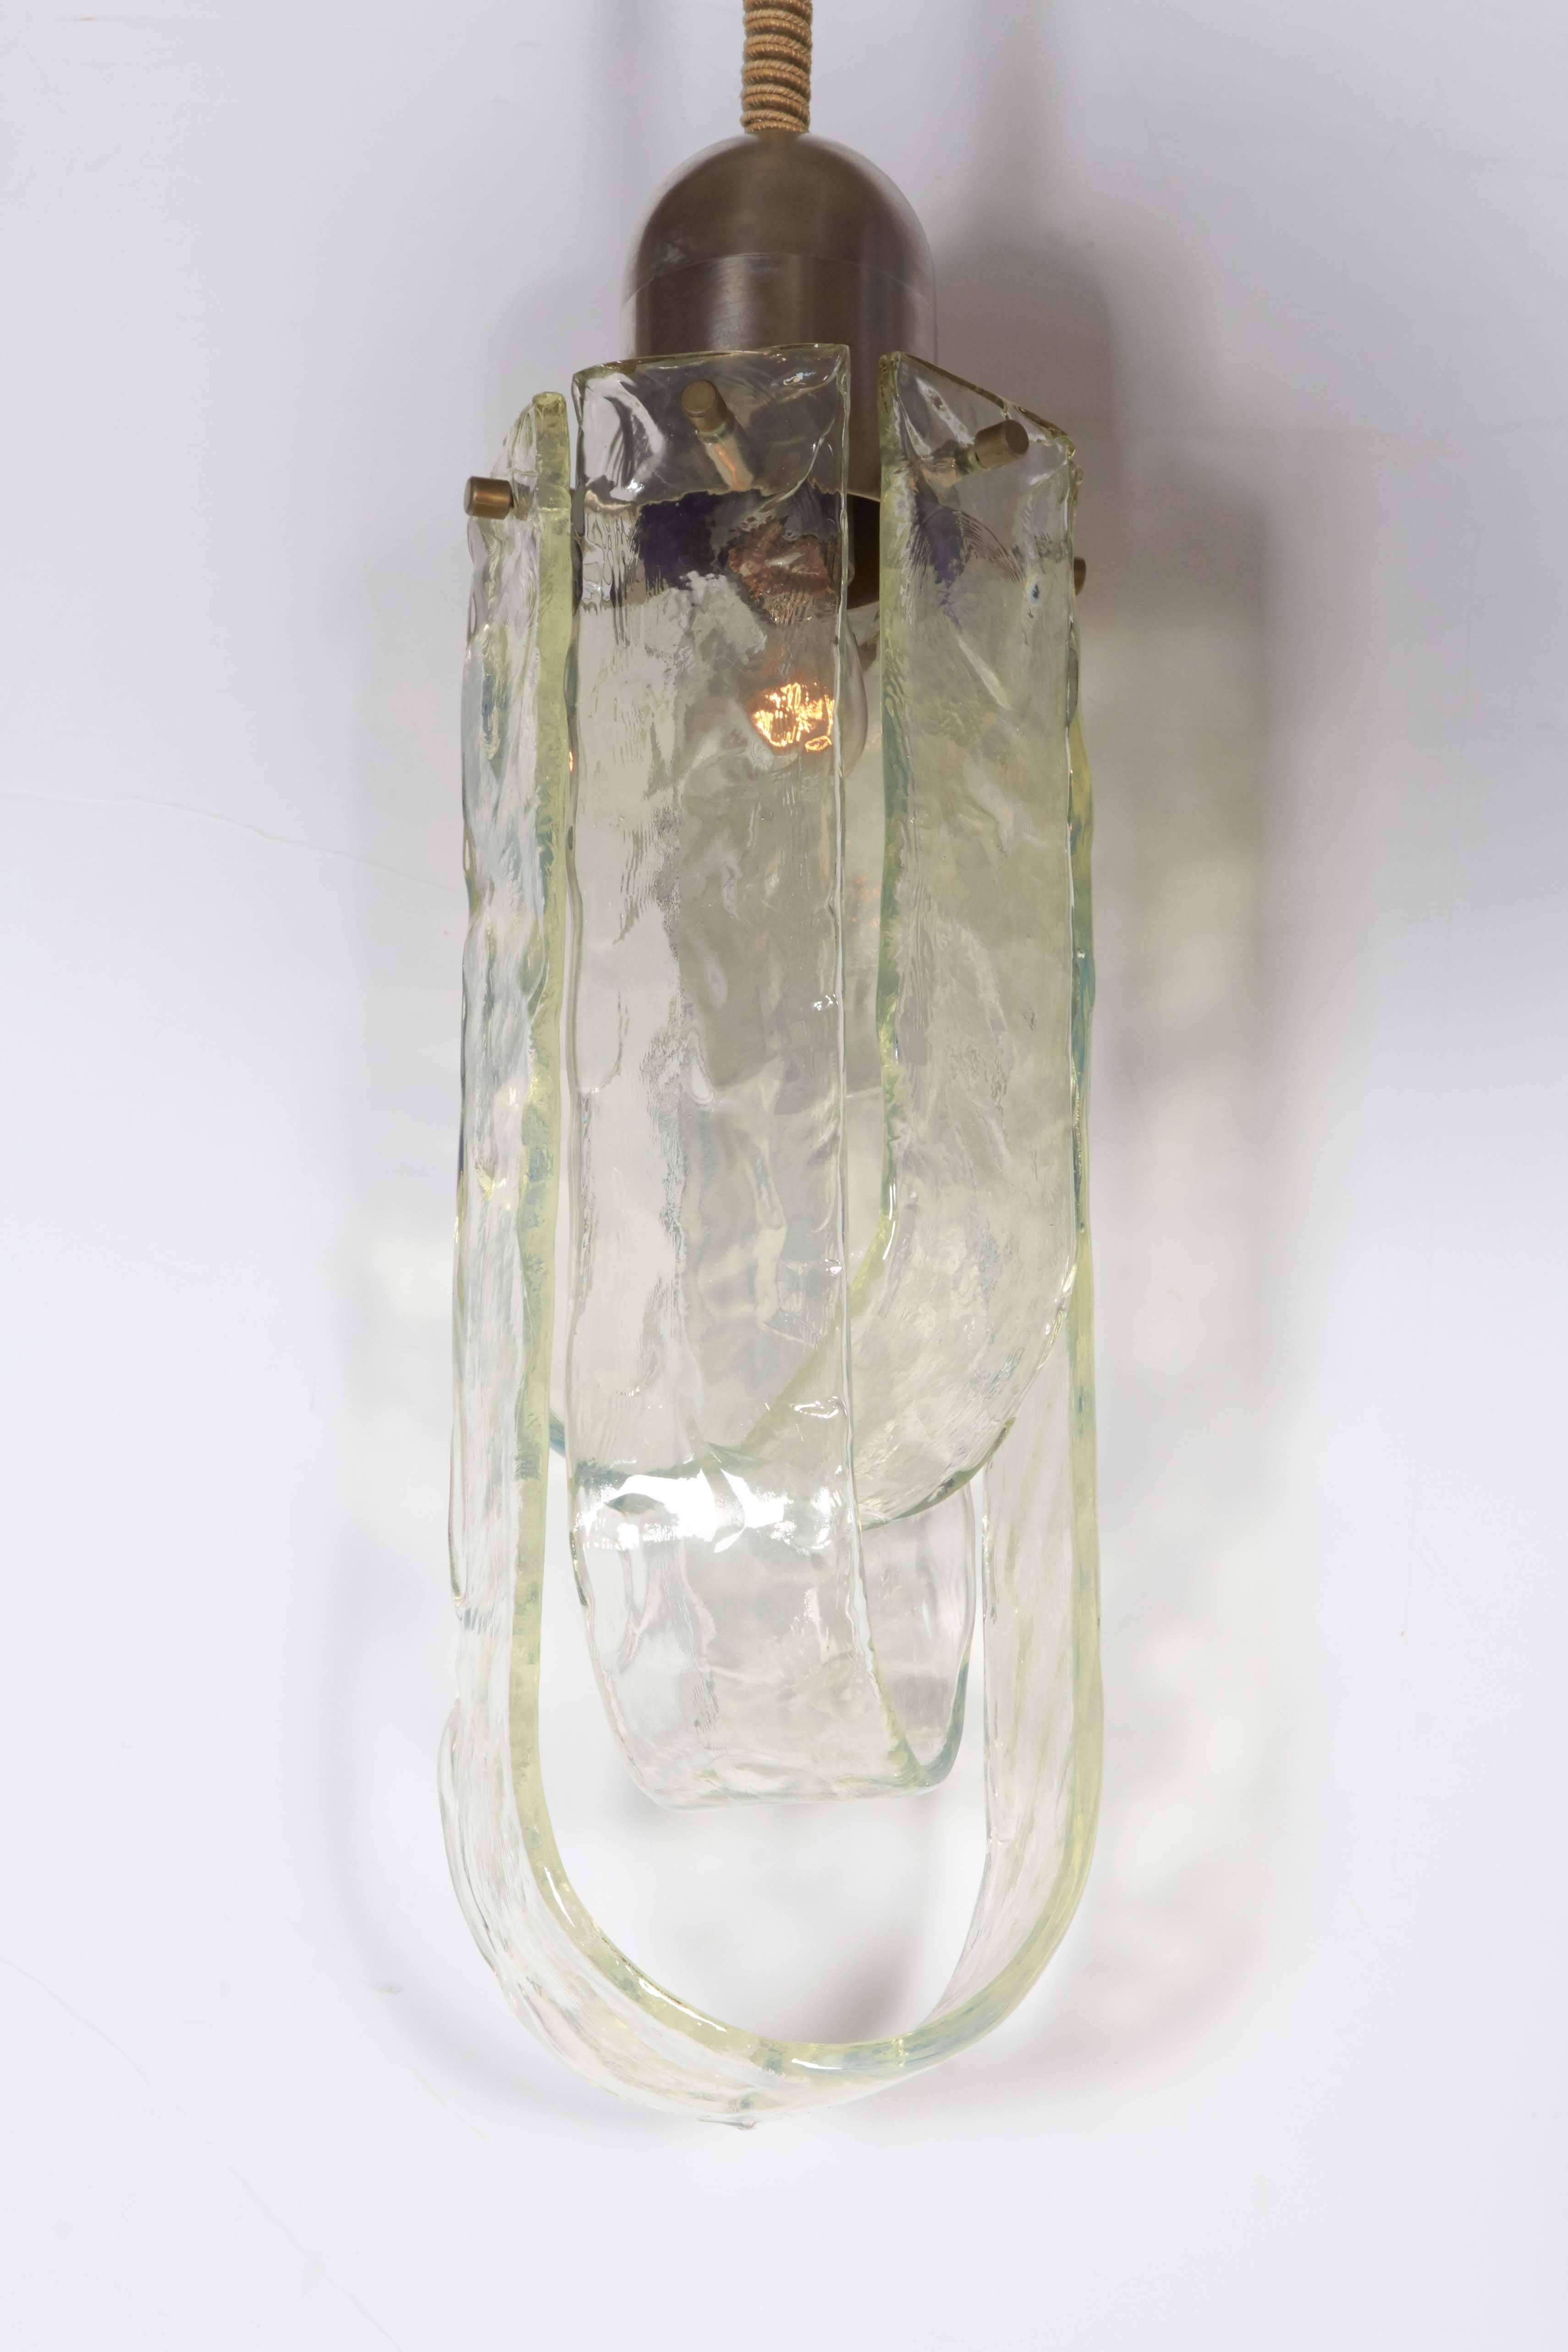 A lovely 1970s modern design pendant light by well-known Italian lighting and glass house Mazzega. Three wide hand formed long bands of glass in small, medium and large sizes are suspended over a single light bulb. The glass bands create a shade